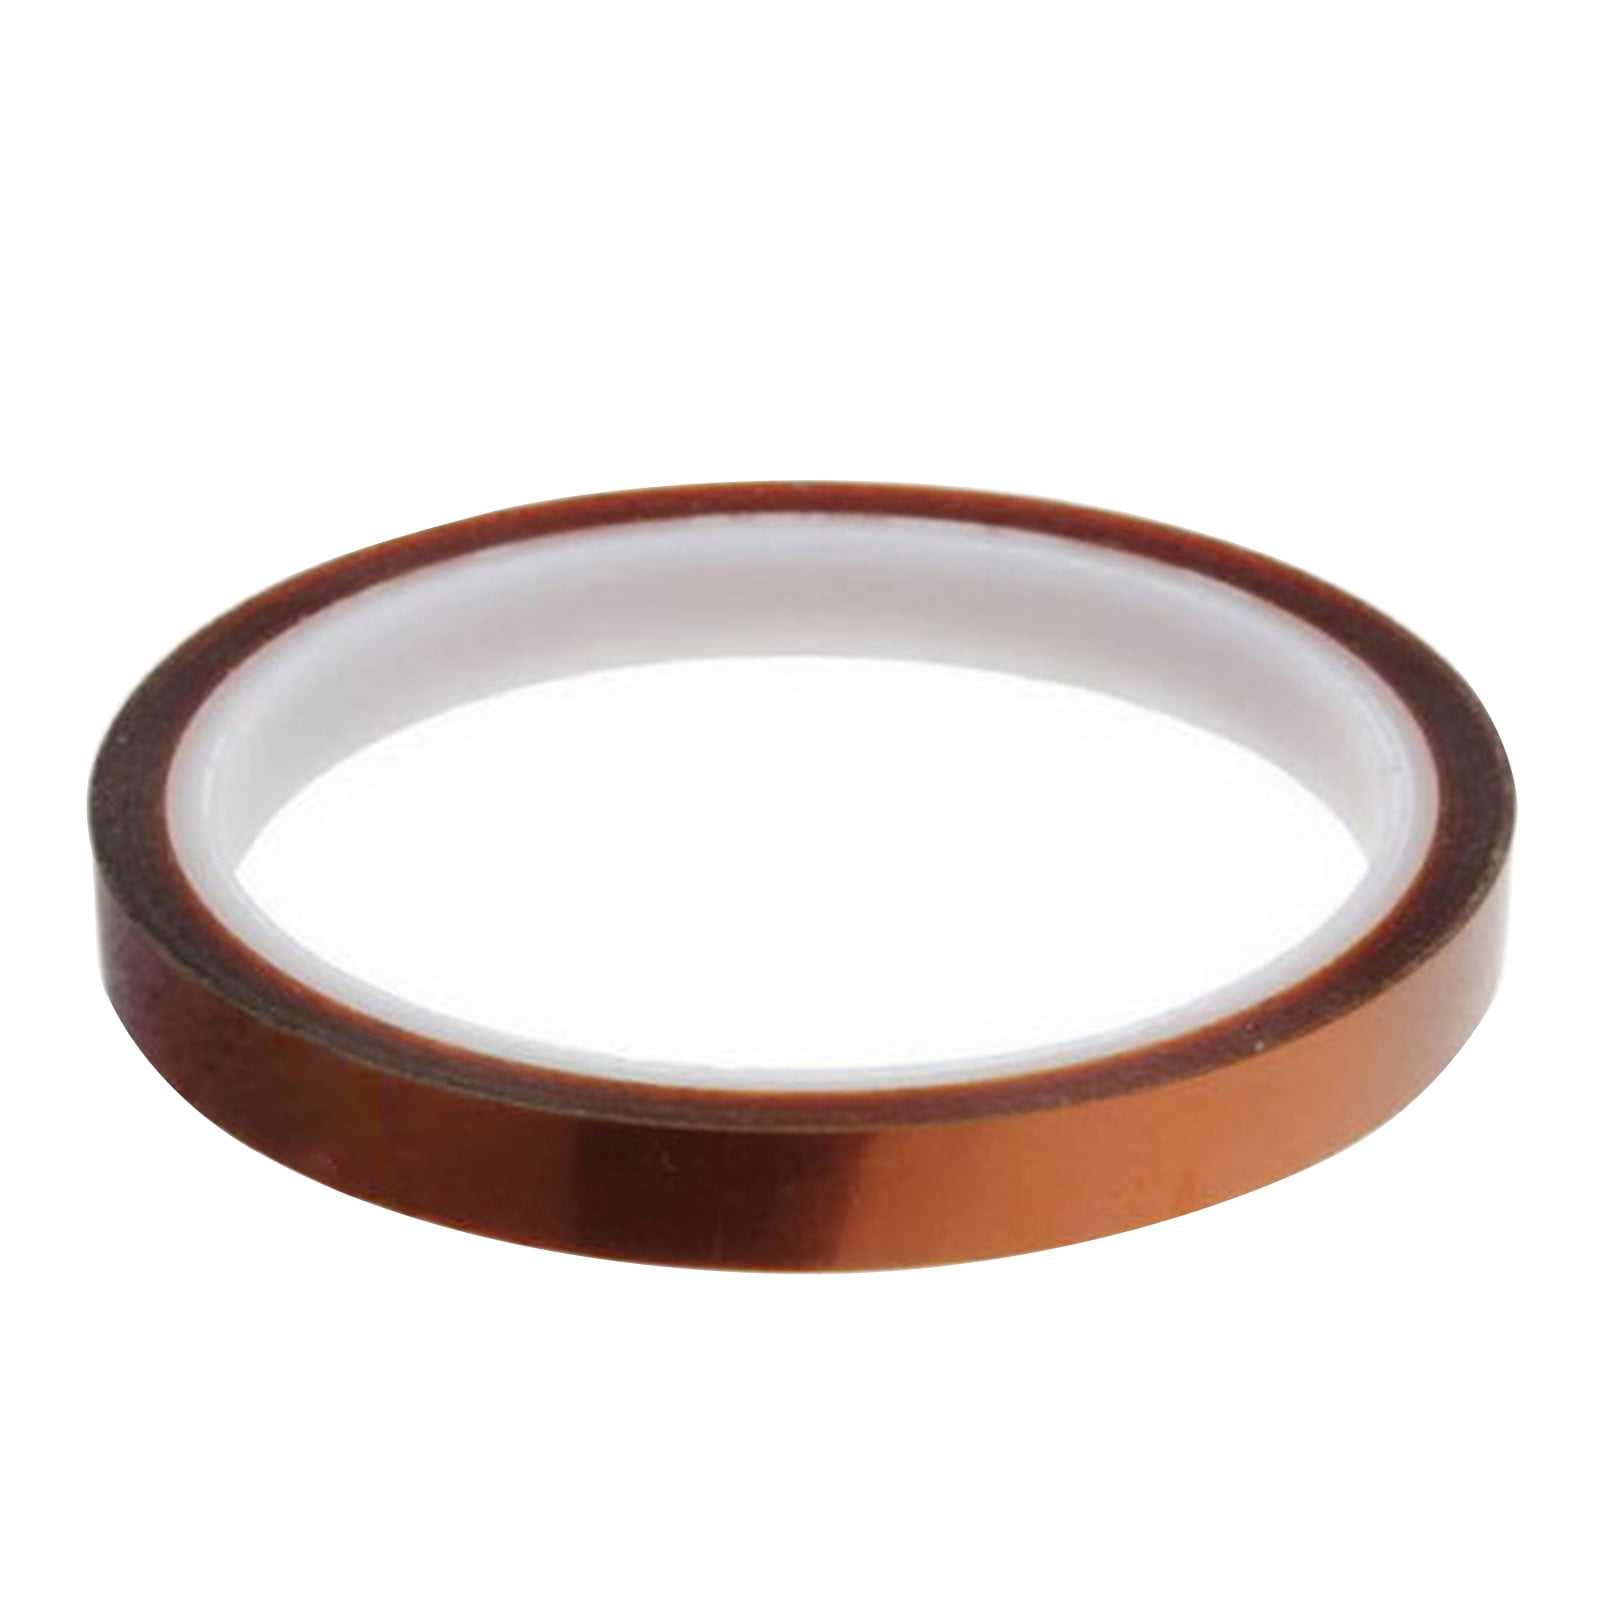 8mm x 33m Kapton Adhesive Tape High Temperature Heat Resistant Polyimide 